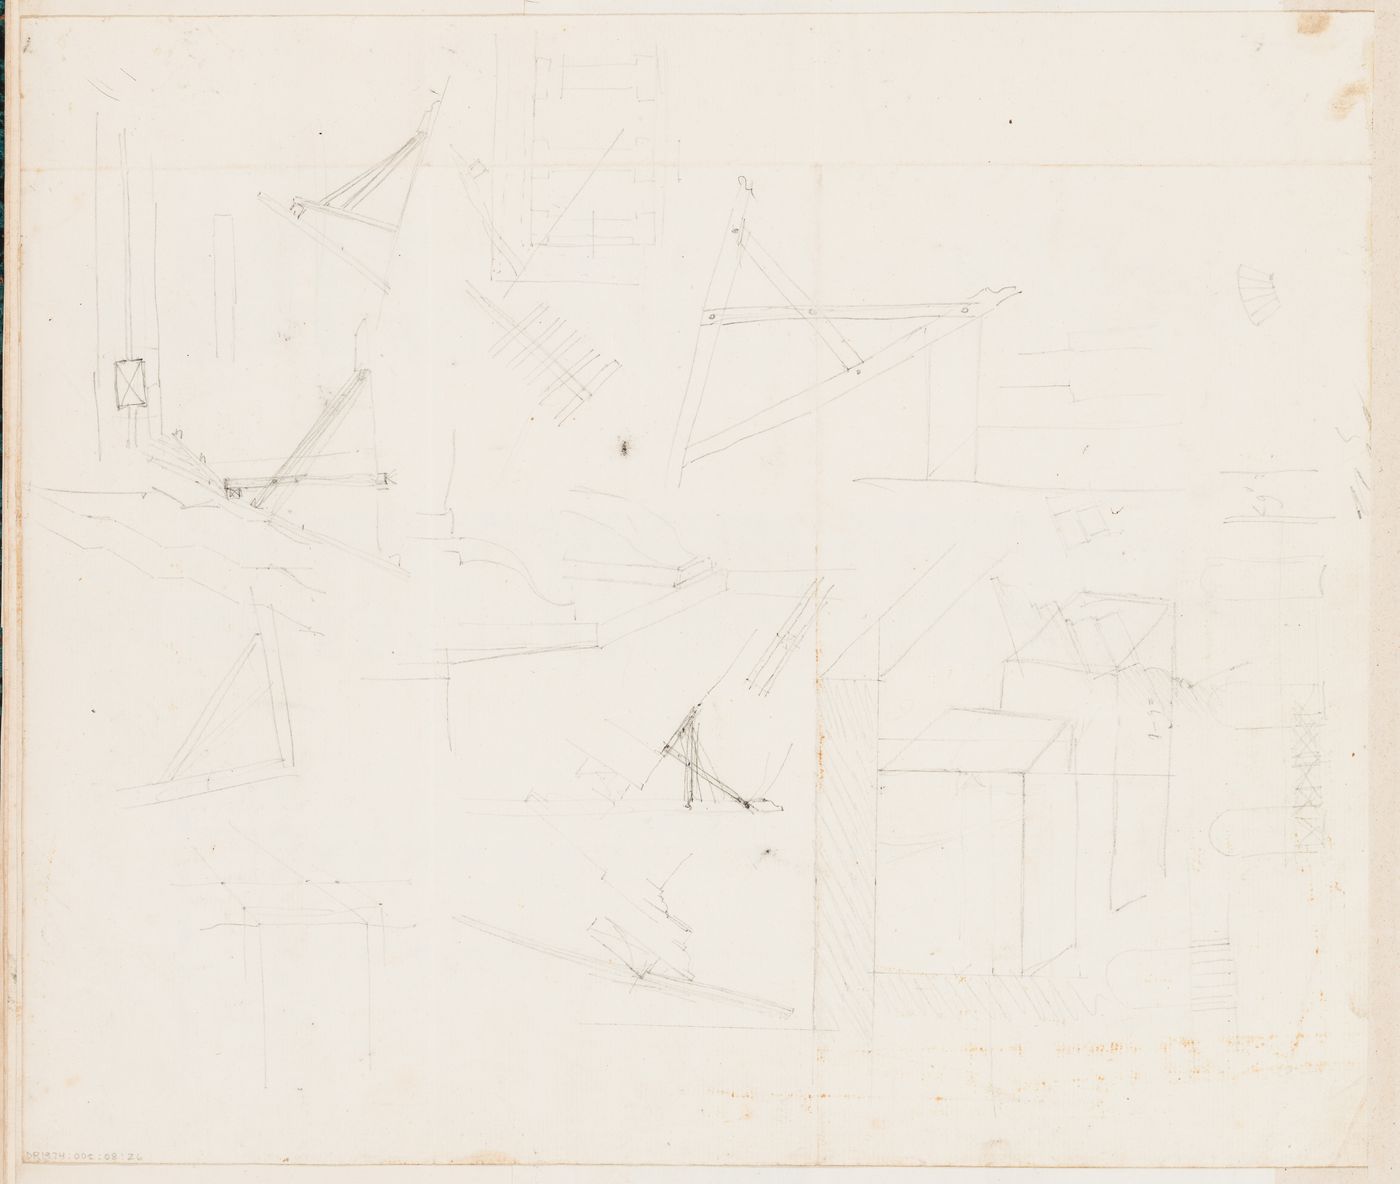 Sketches for unidentified wooden structures